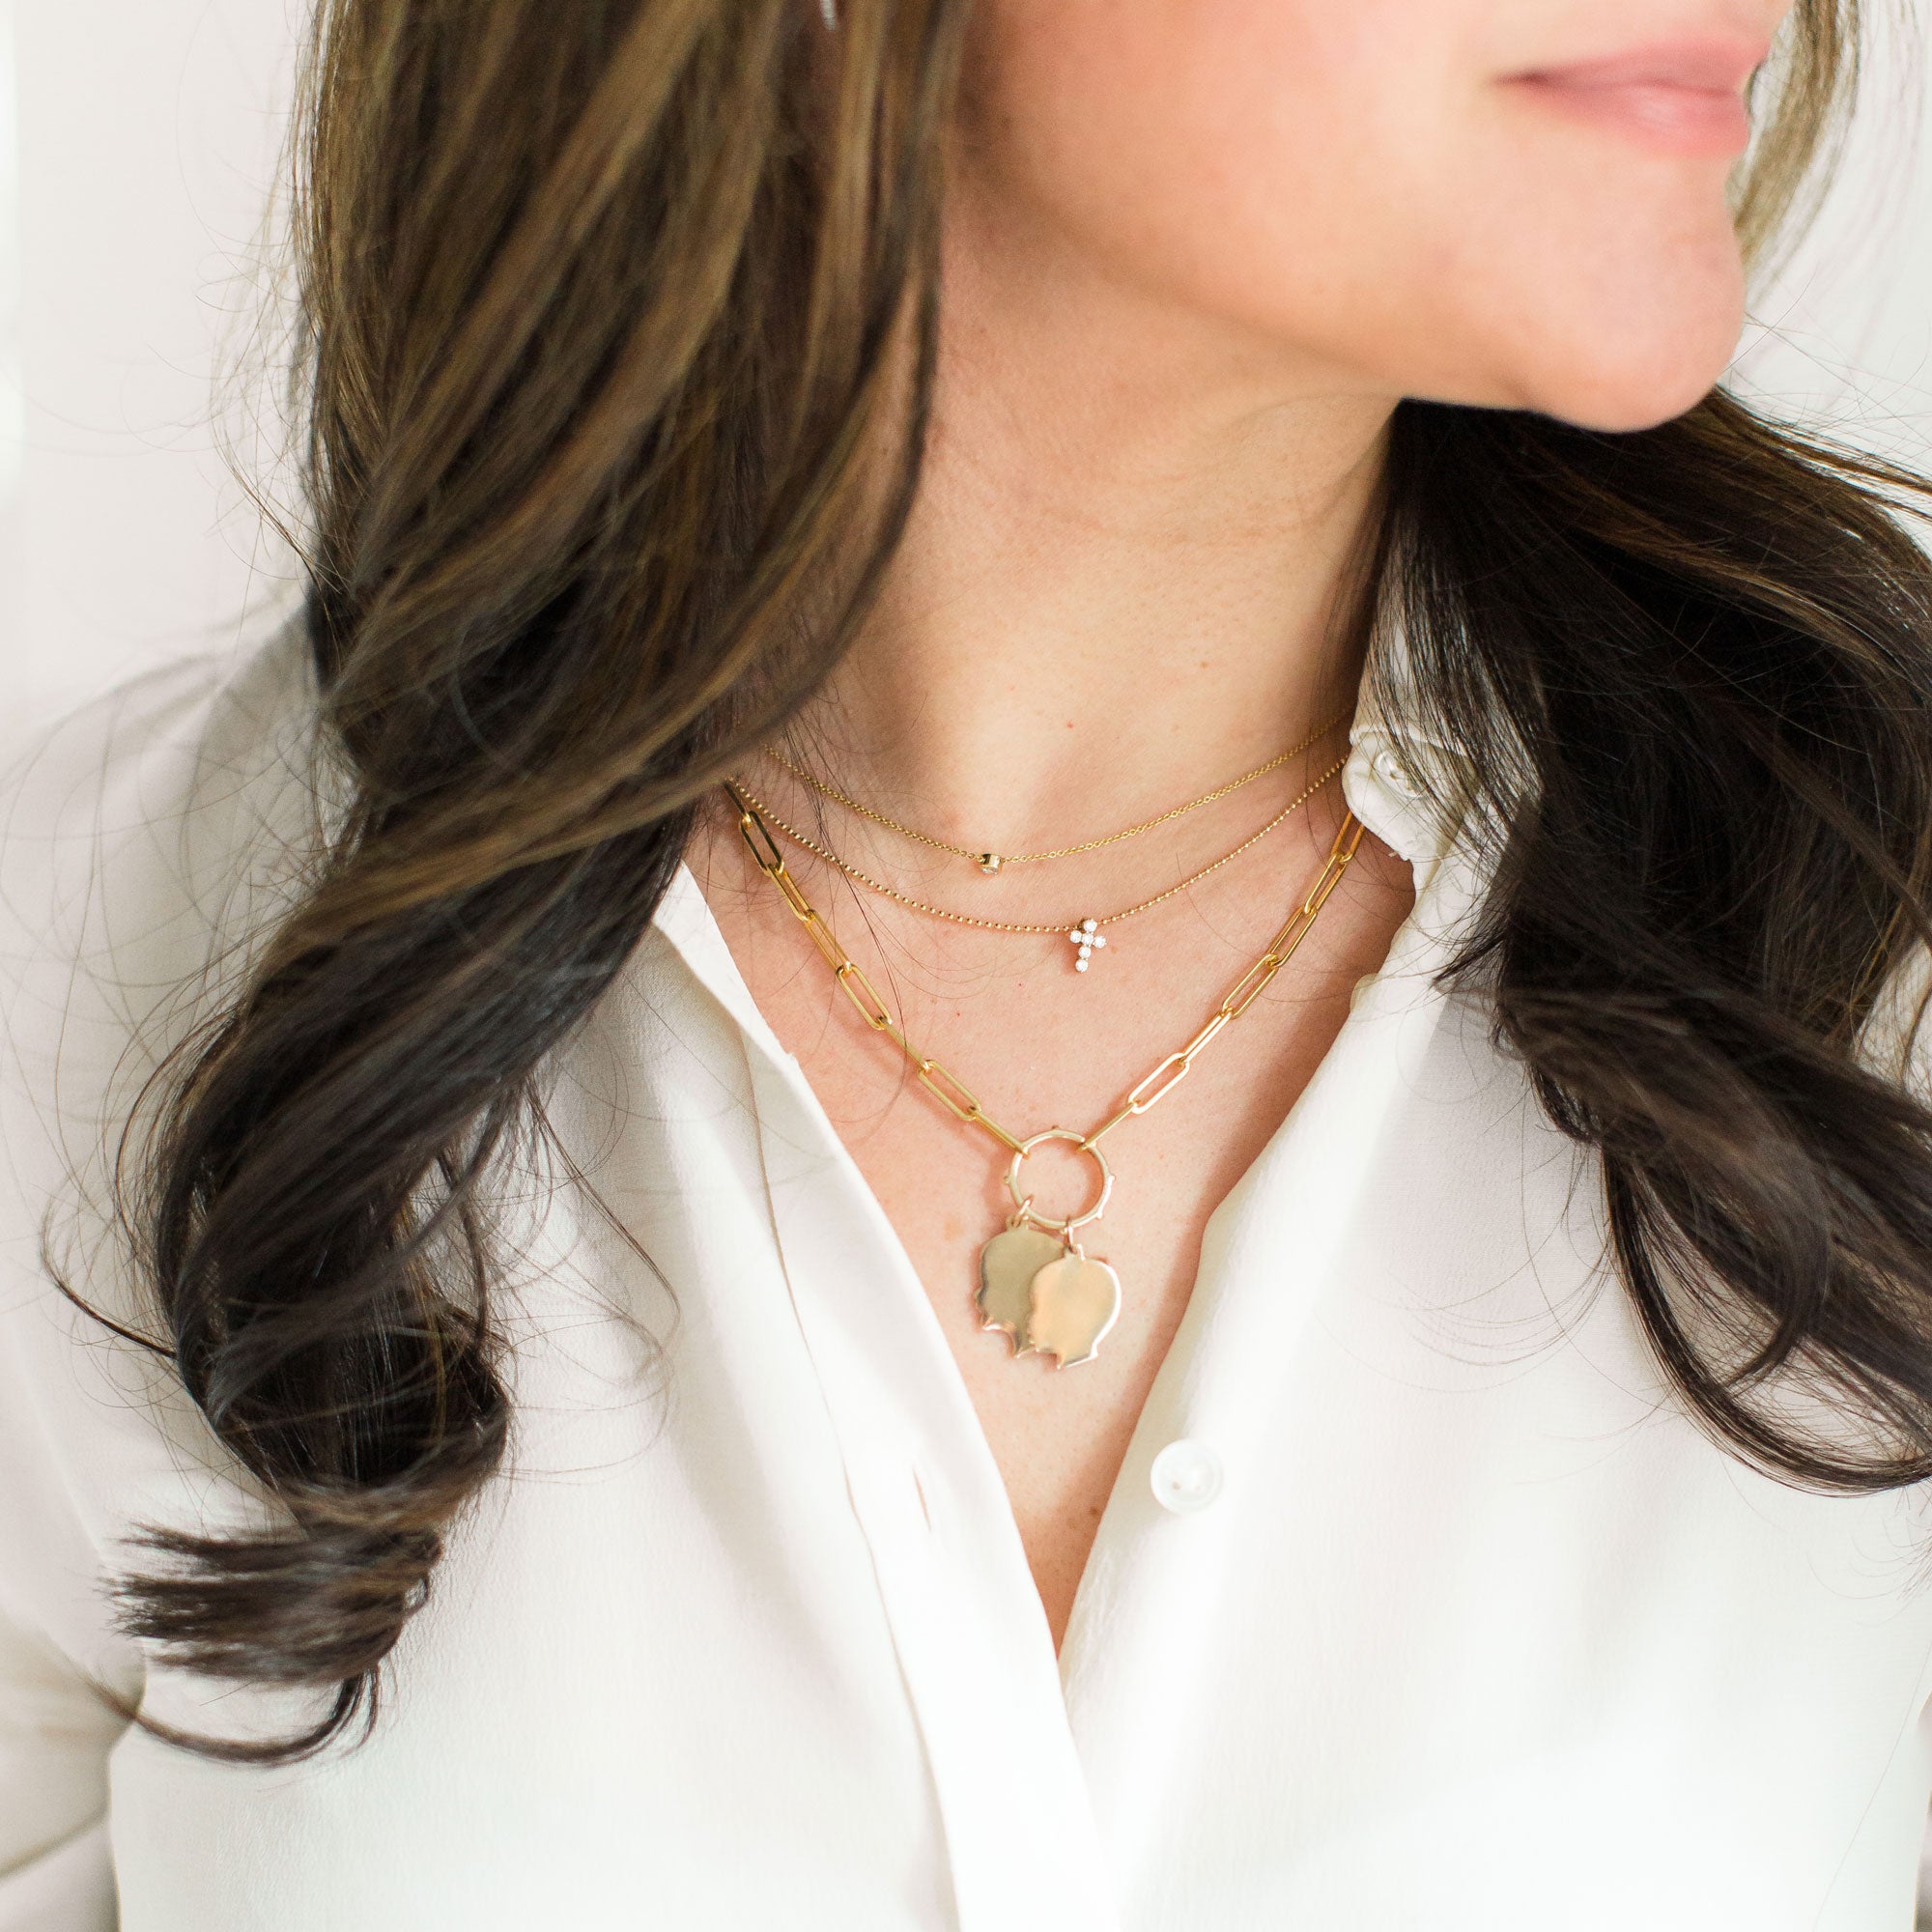 Build Your Own 14K Gold Heirloom Charm Necklace